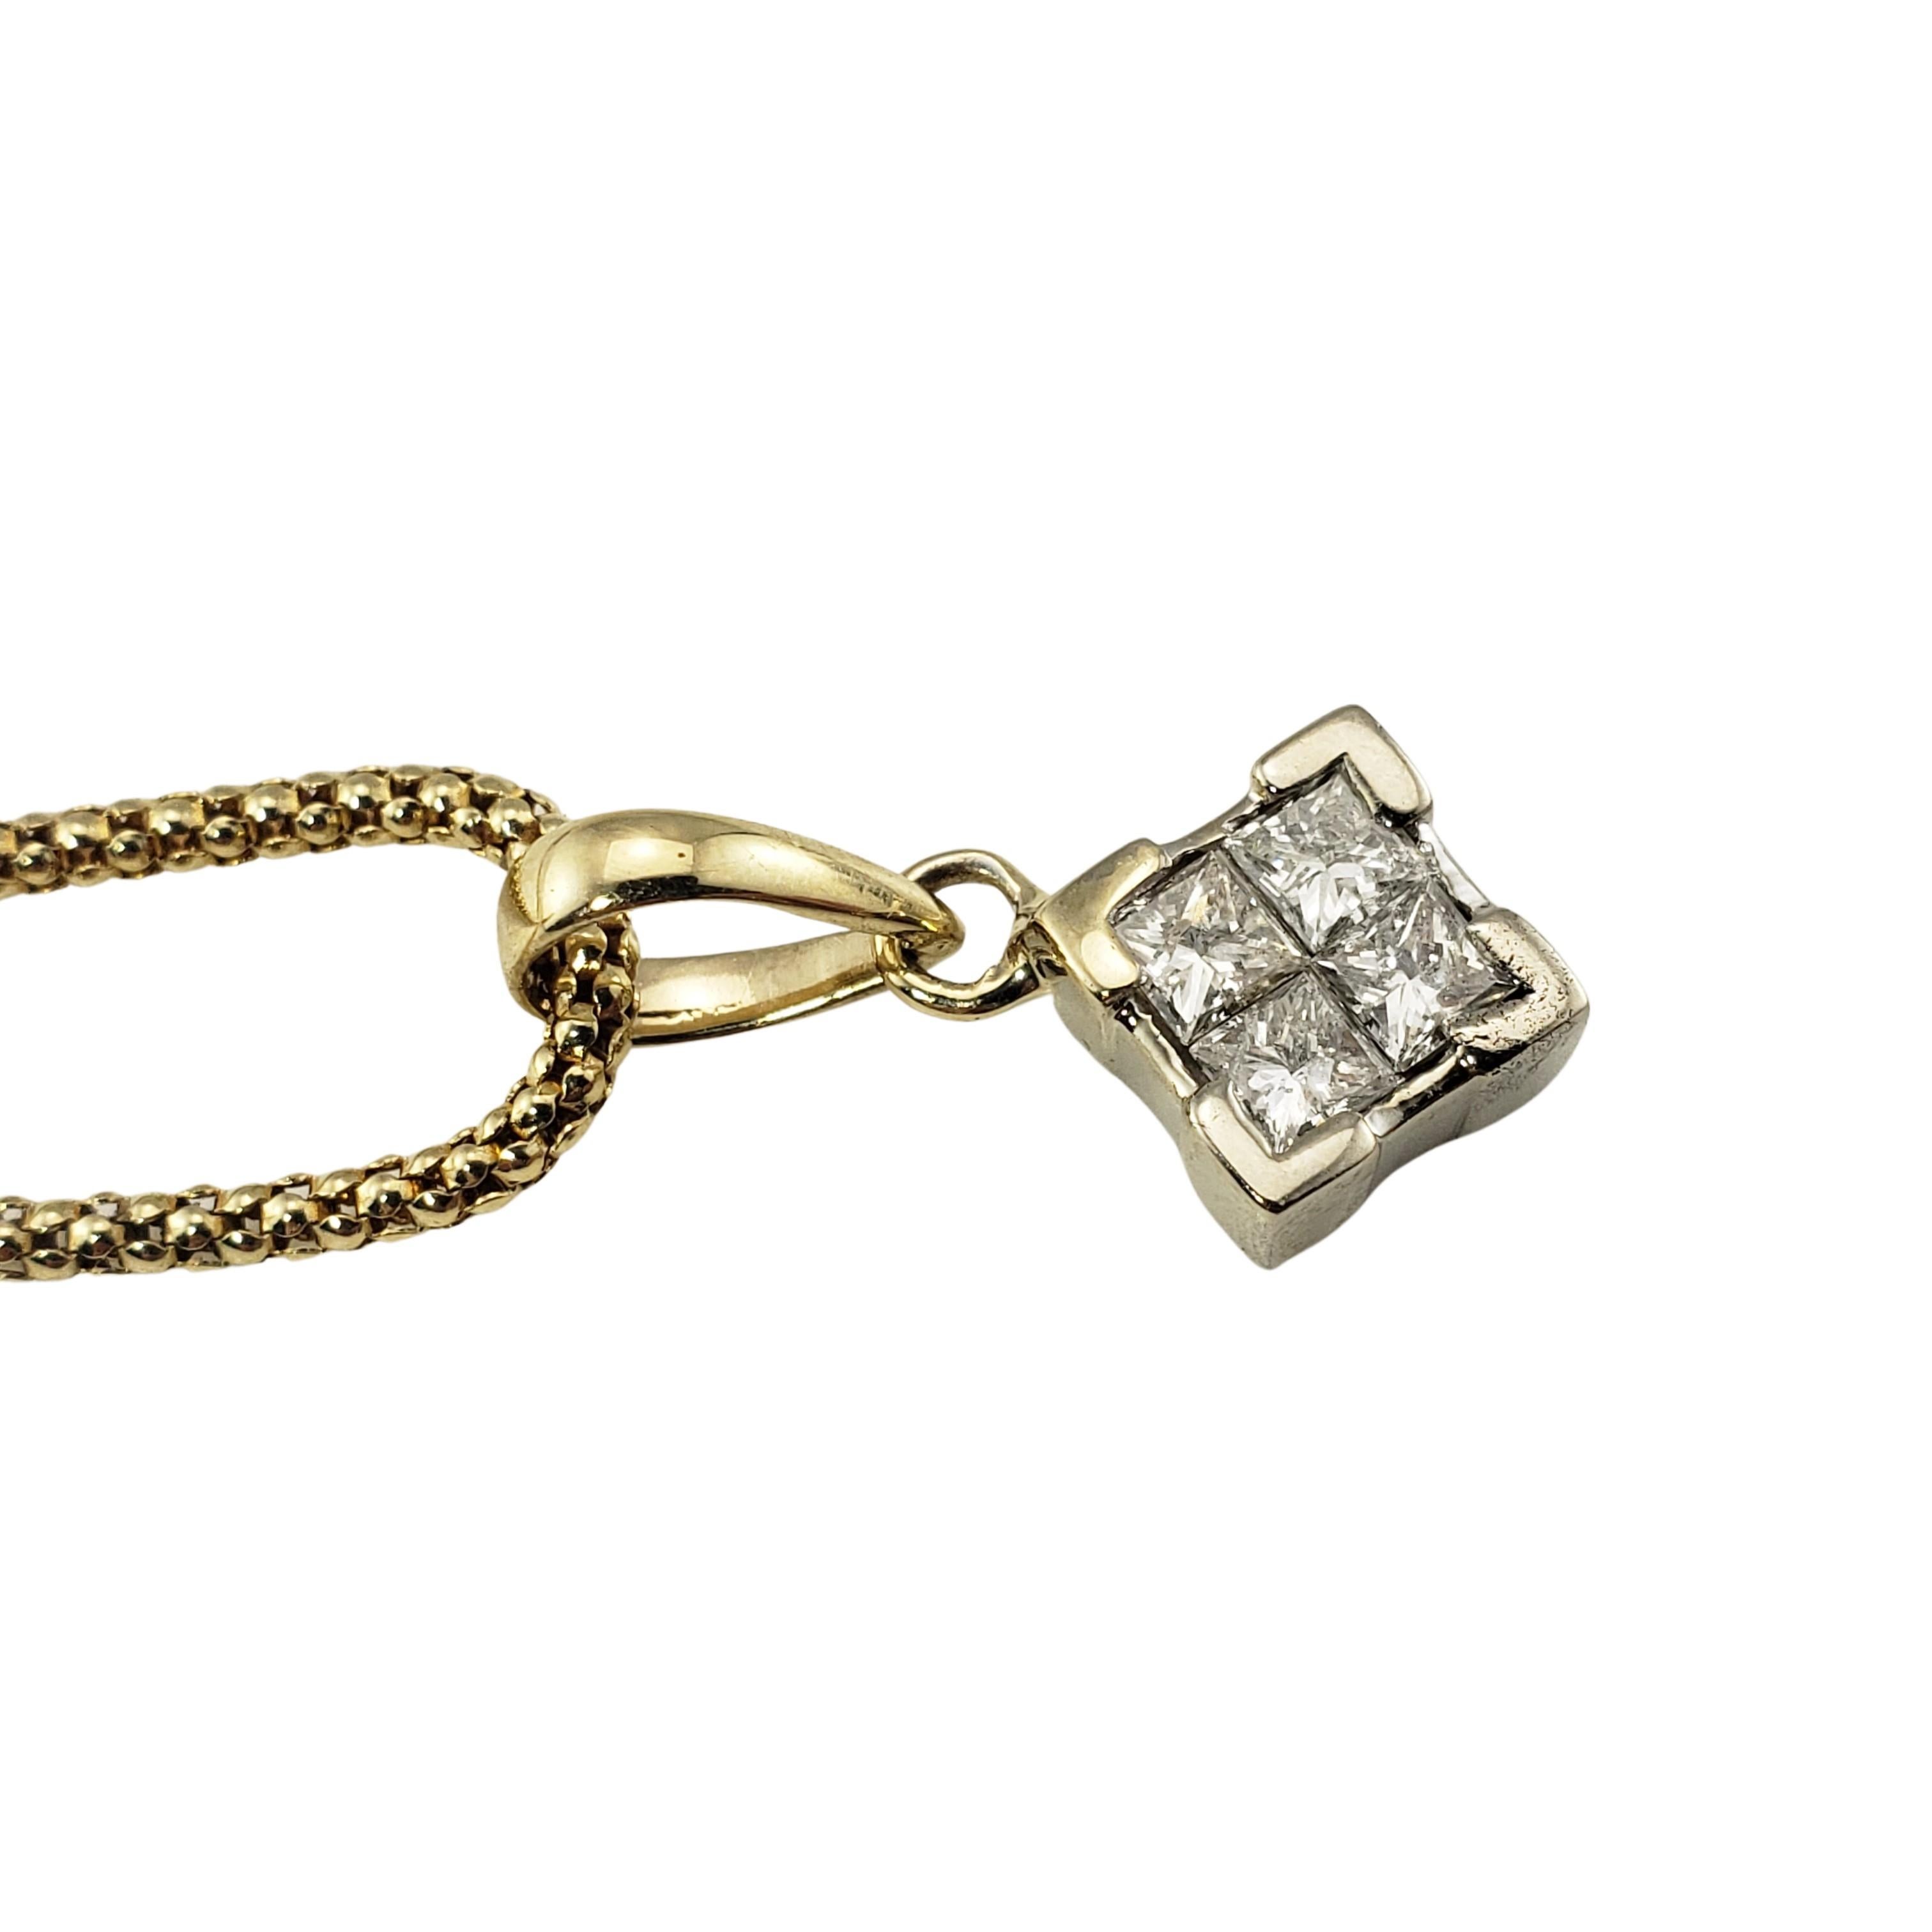 14 Karat Yellow Gold Diamond Pendant Necklace-

This sparkling pendant features four princess cut diamond set in classic 14K yellow gold and suspends from a 14K yellow gold necklace.

Approximate total diamond weight:  .60 ct.

Diamond color: